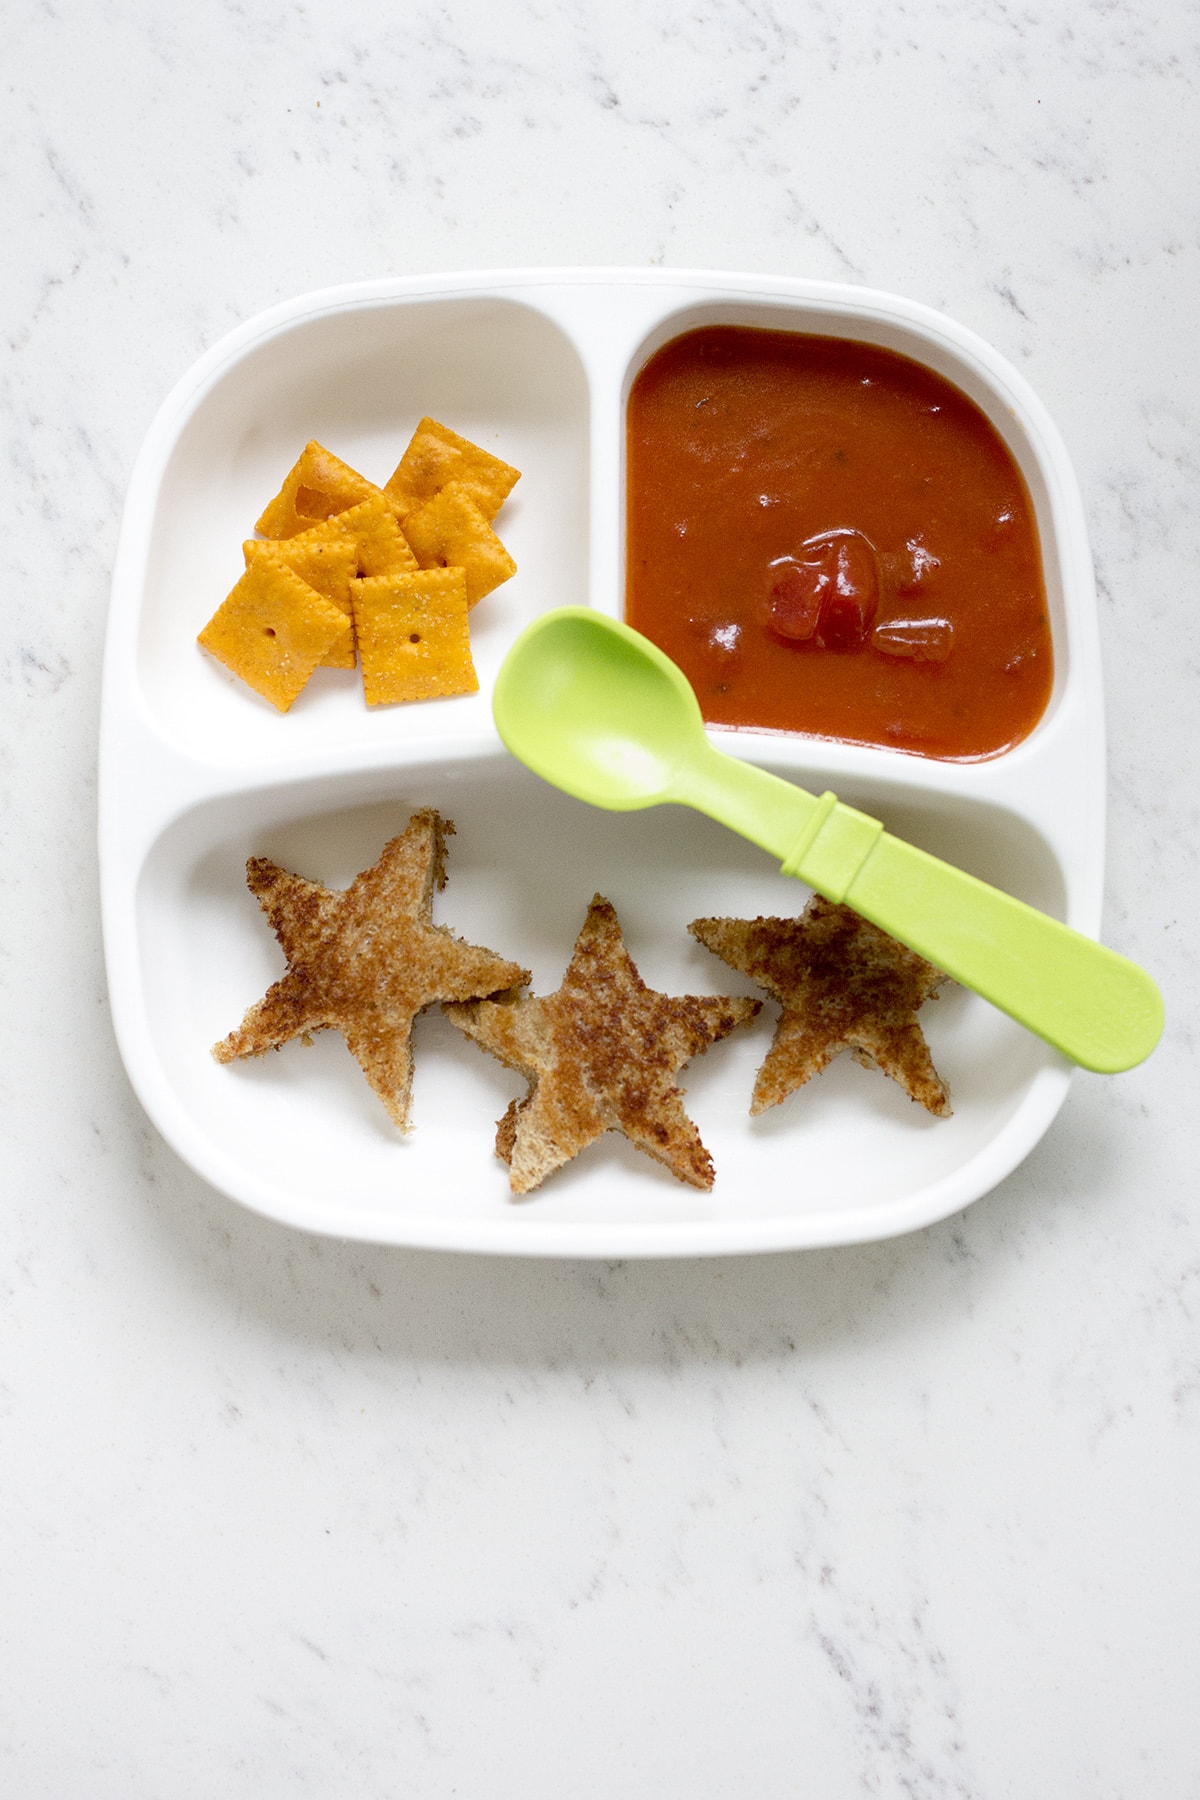 Toddler Meals What I fed the twins